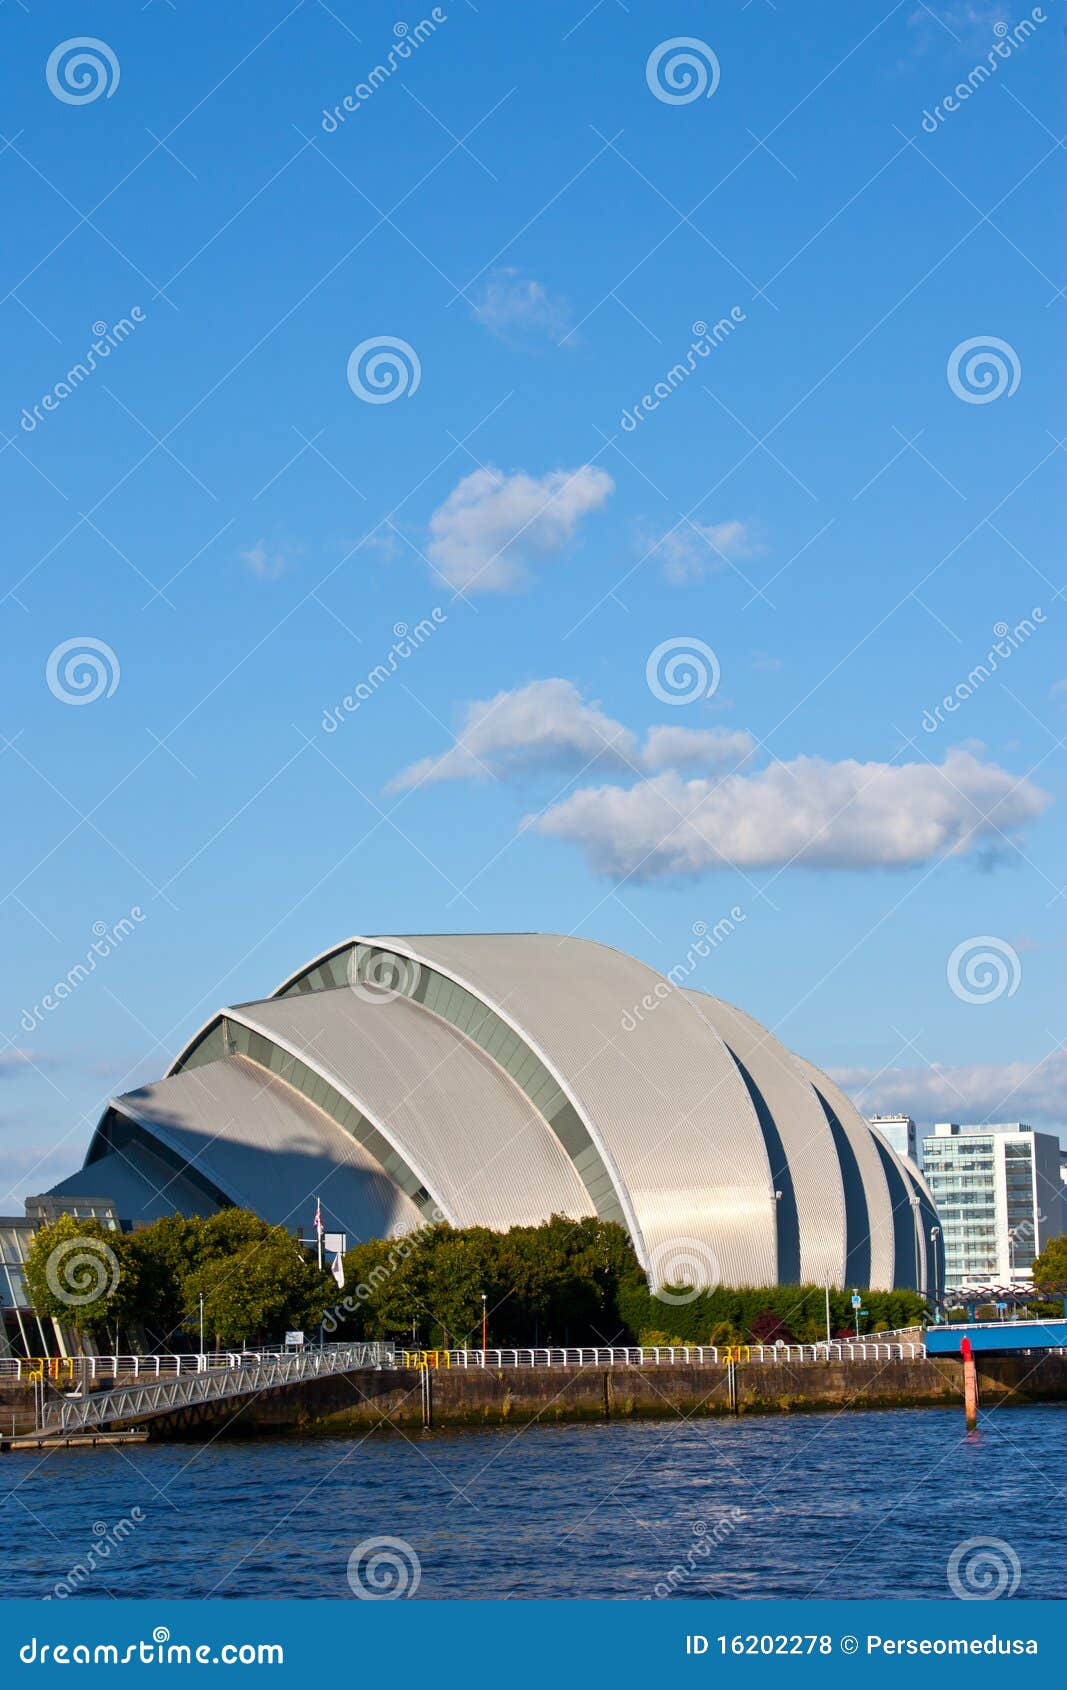 View of Glasgow Armadillo from the Science Center.